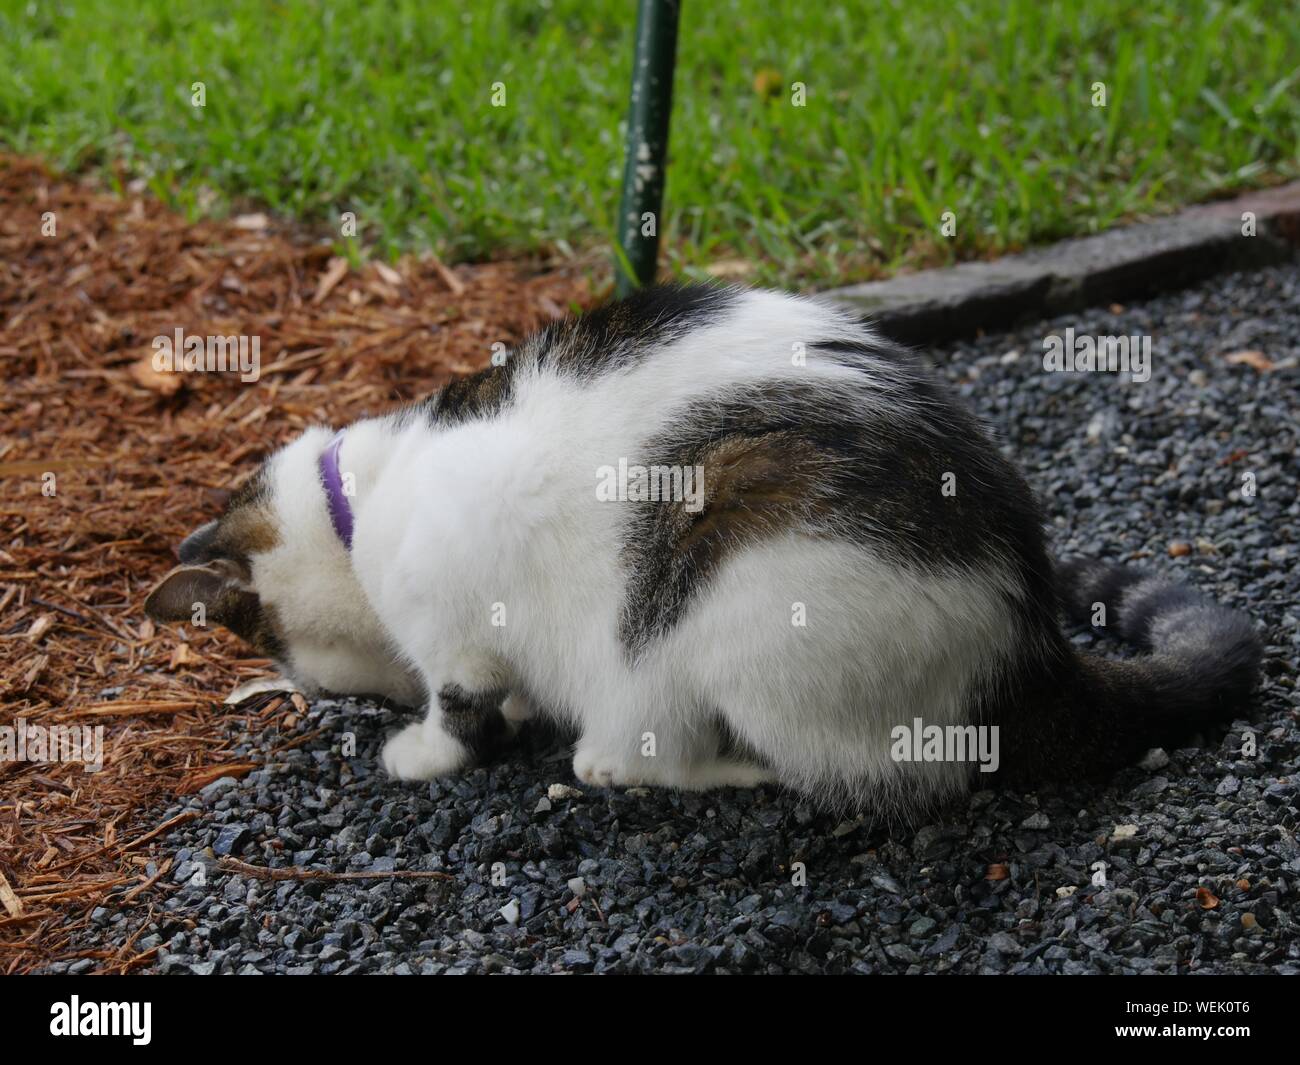 One of the pampered cats at the Hemingway house in Key West, Florida. Stock Photo